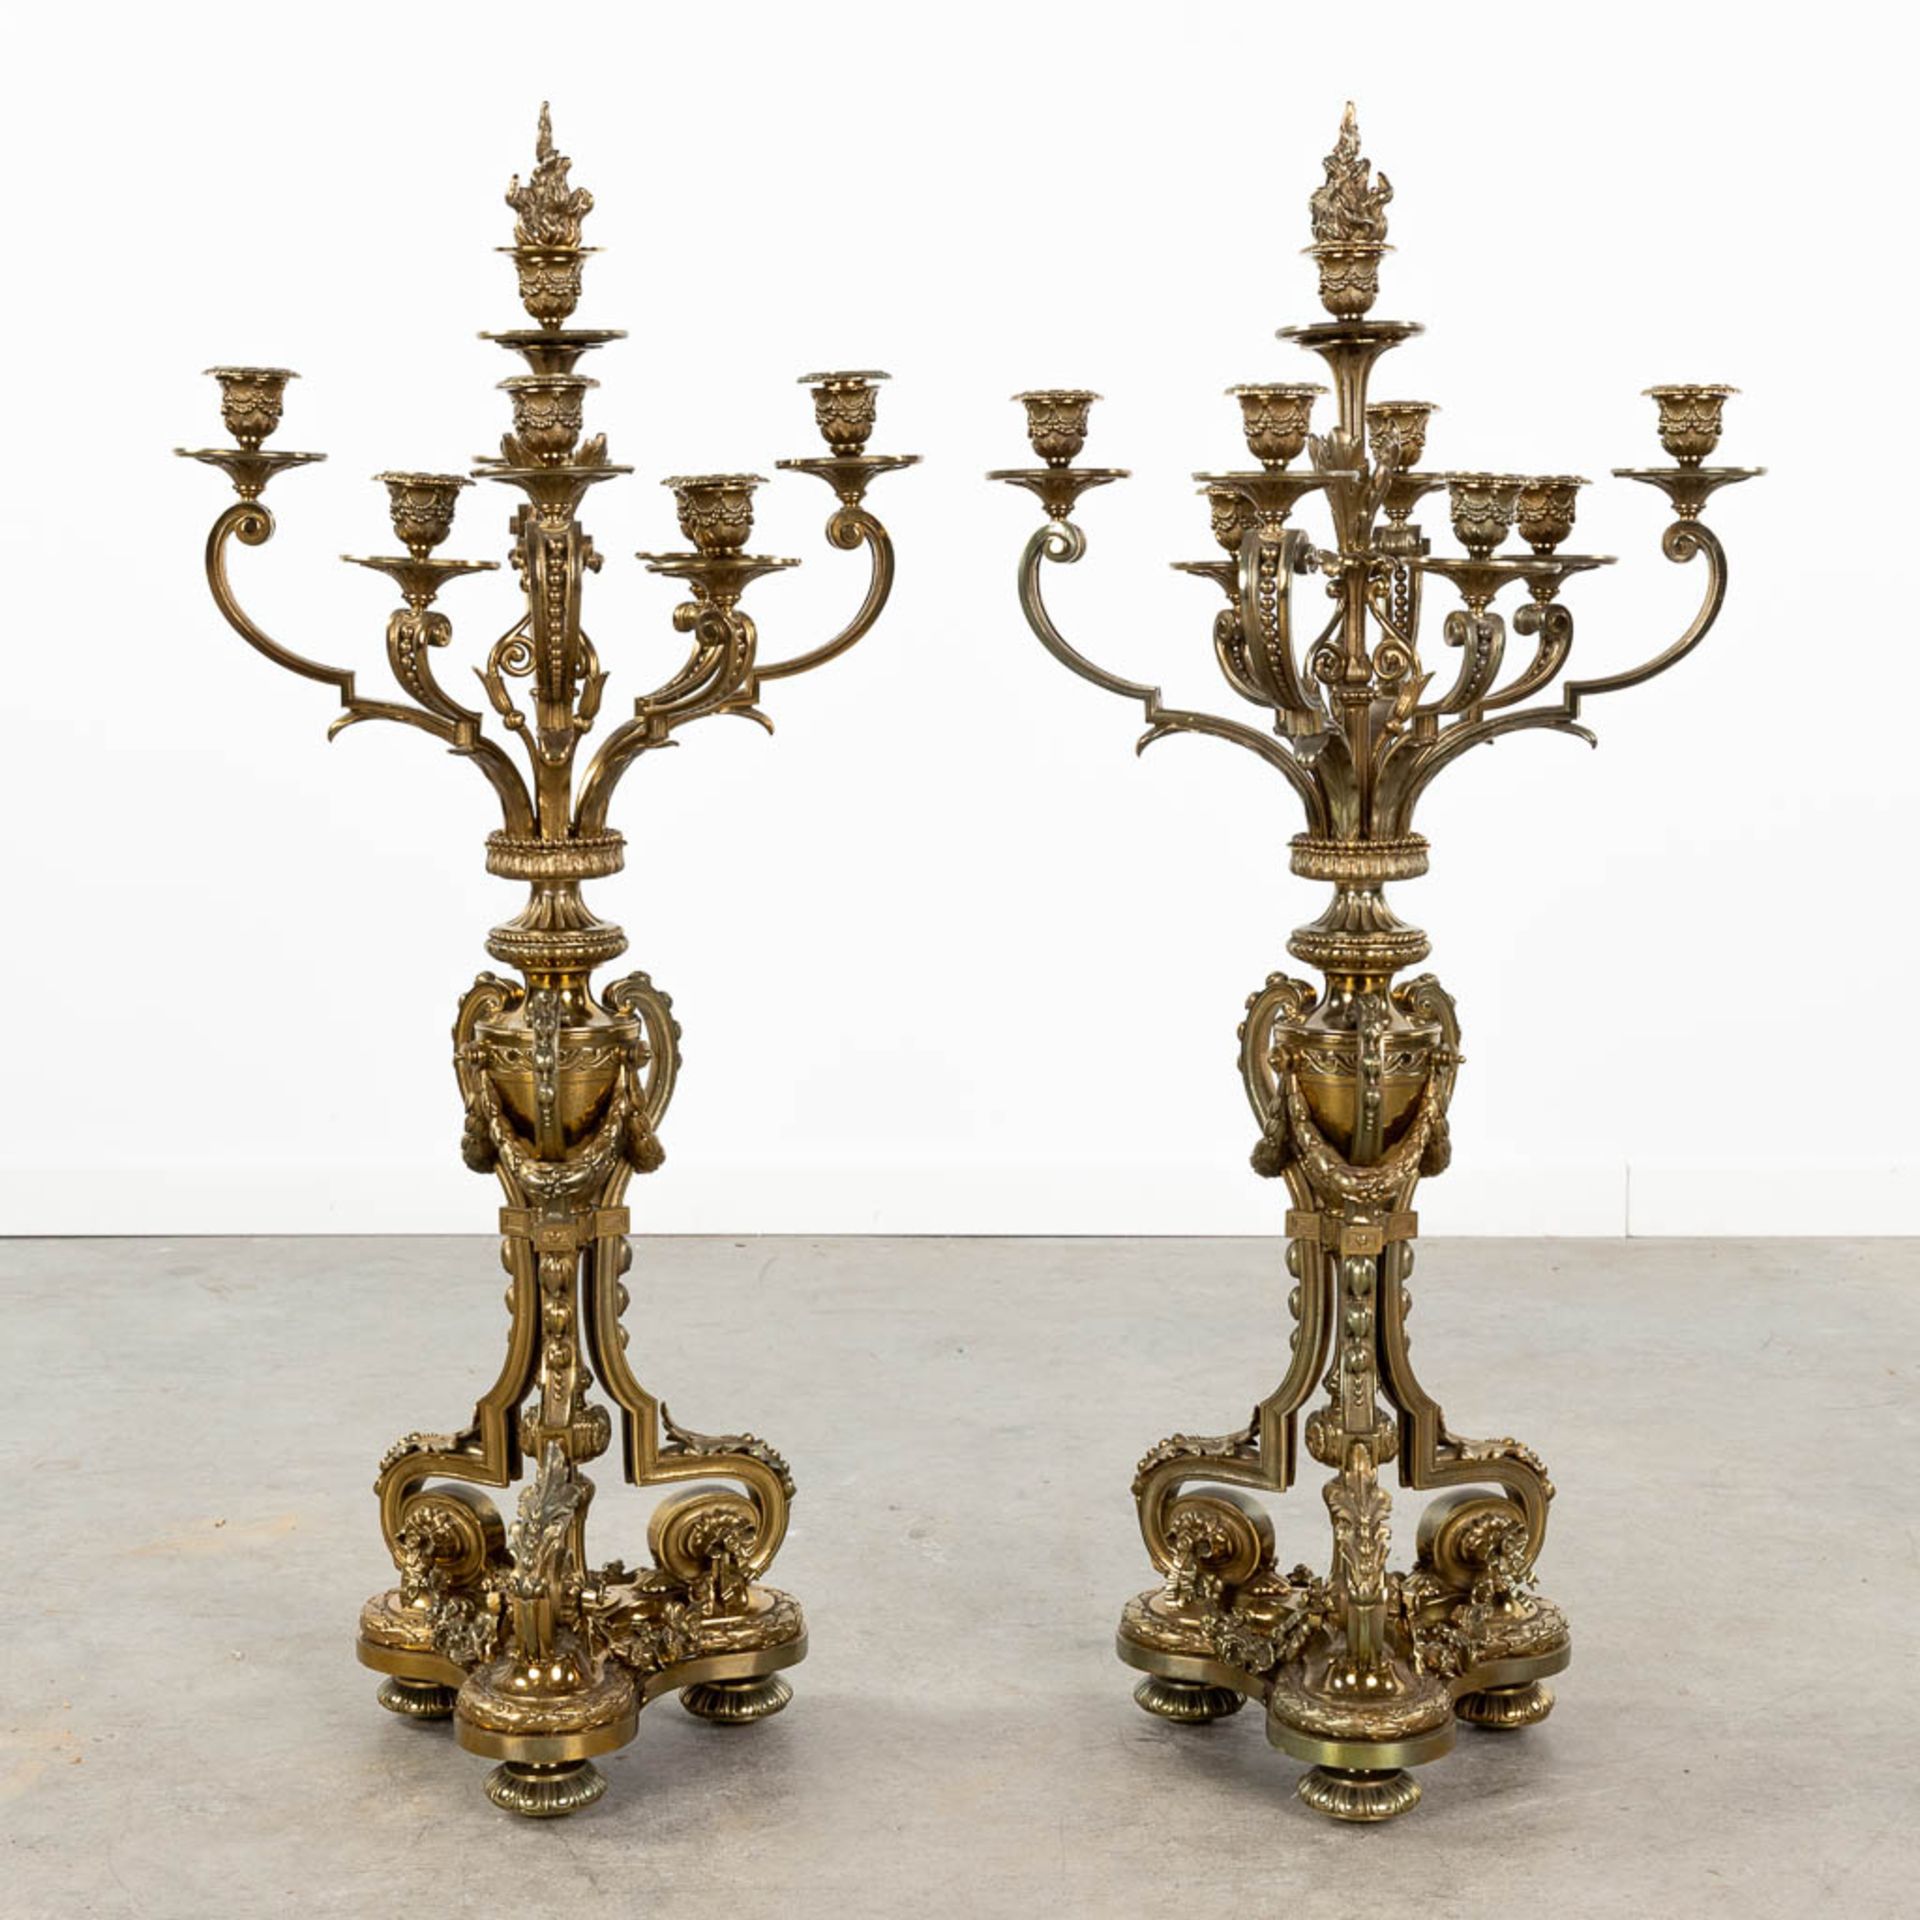 A pair of large neoclassical candelabra made of polished bronze. (L:30 x W:30 x H:90 x D:42,5 cm) - Image 3 of 12